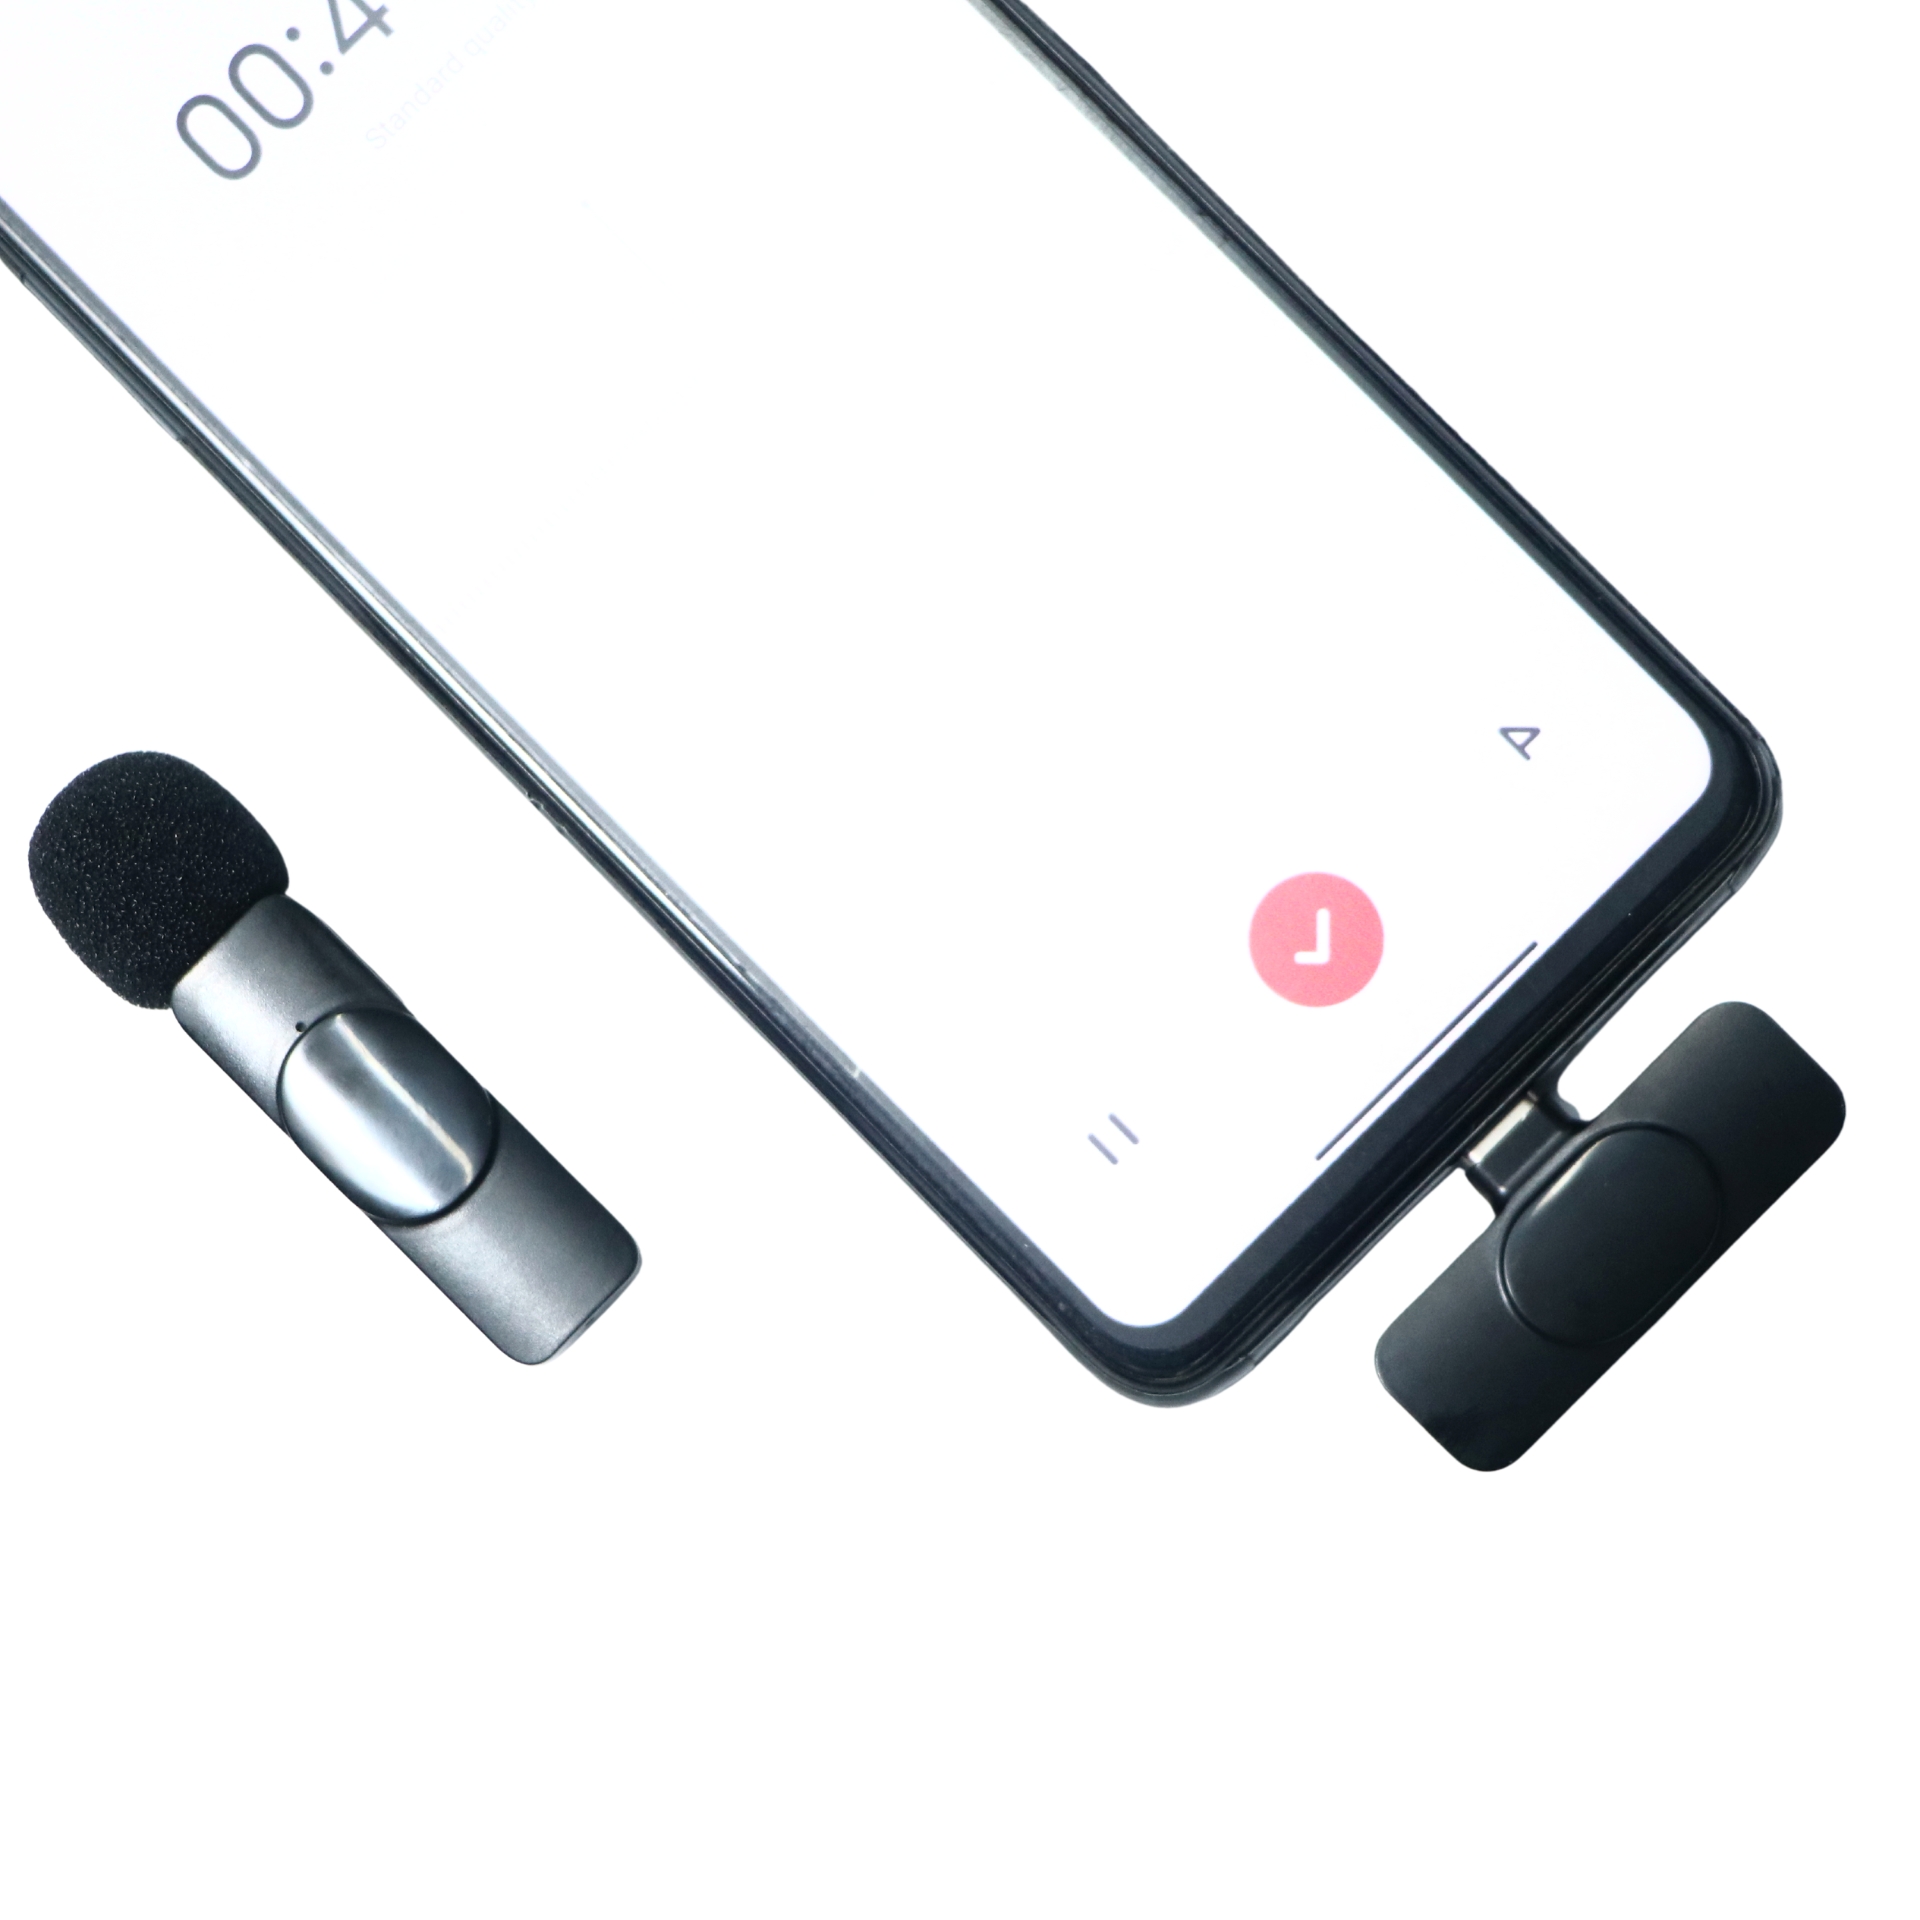 K8 Mobile Microphone